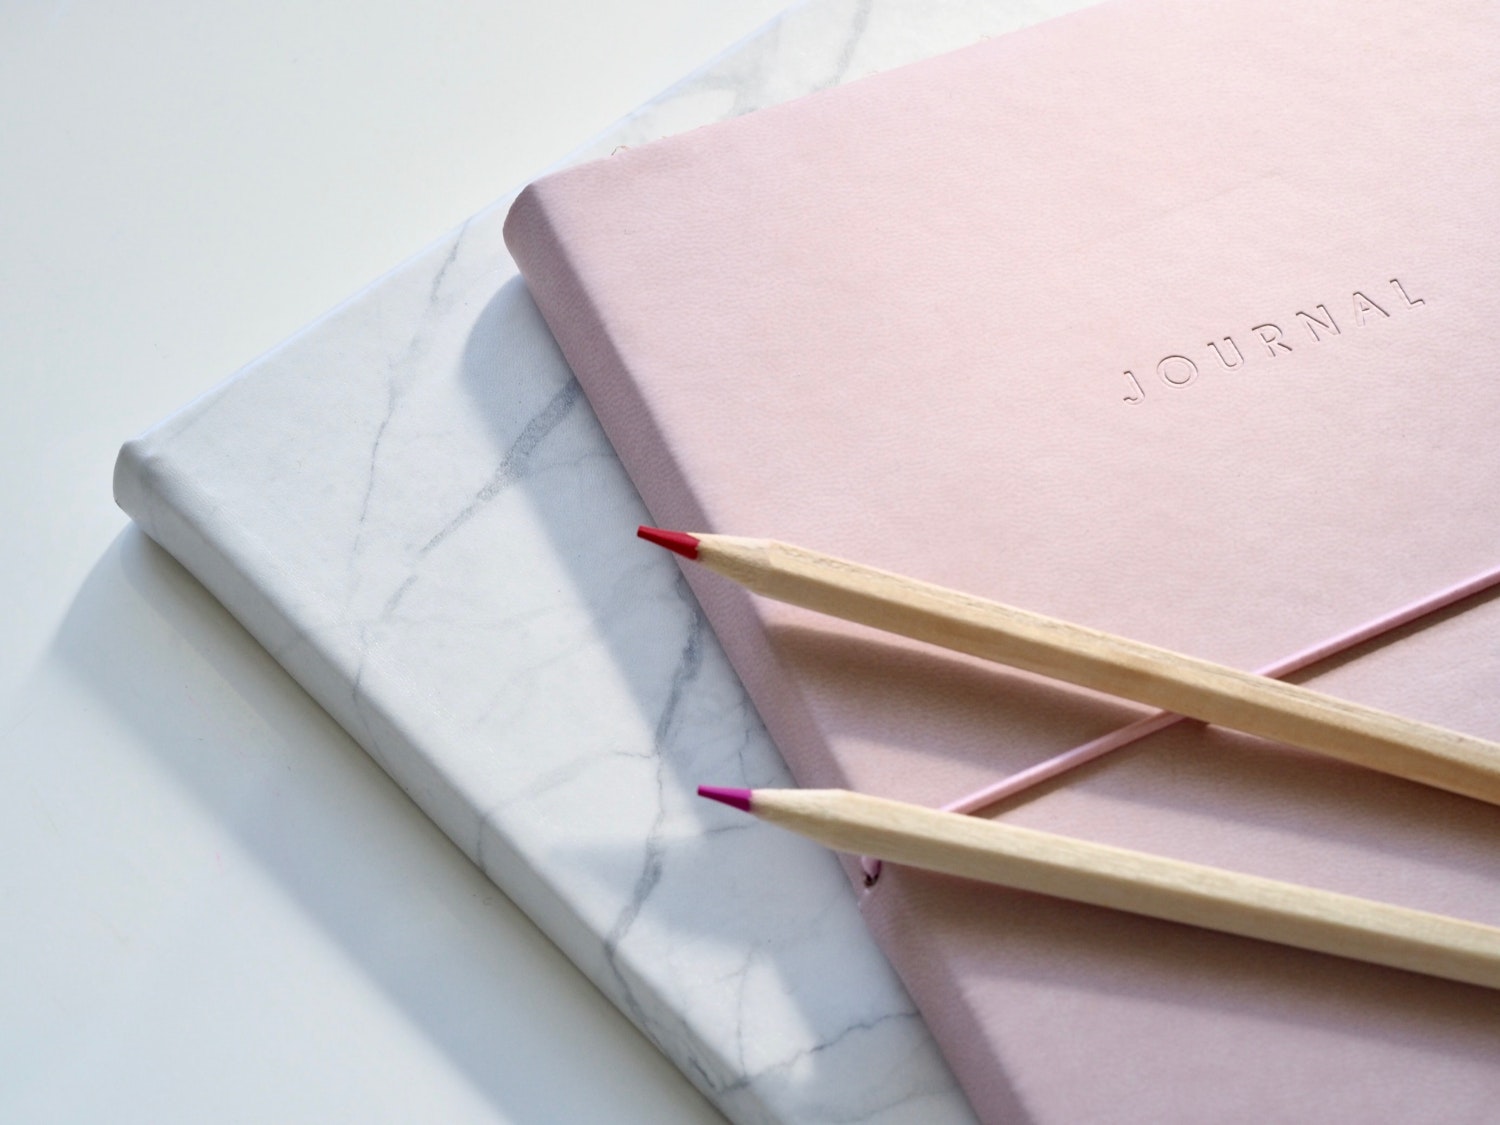 adorable stationery laying on a marble table